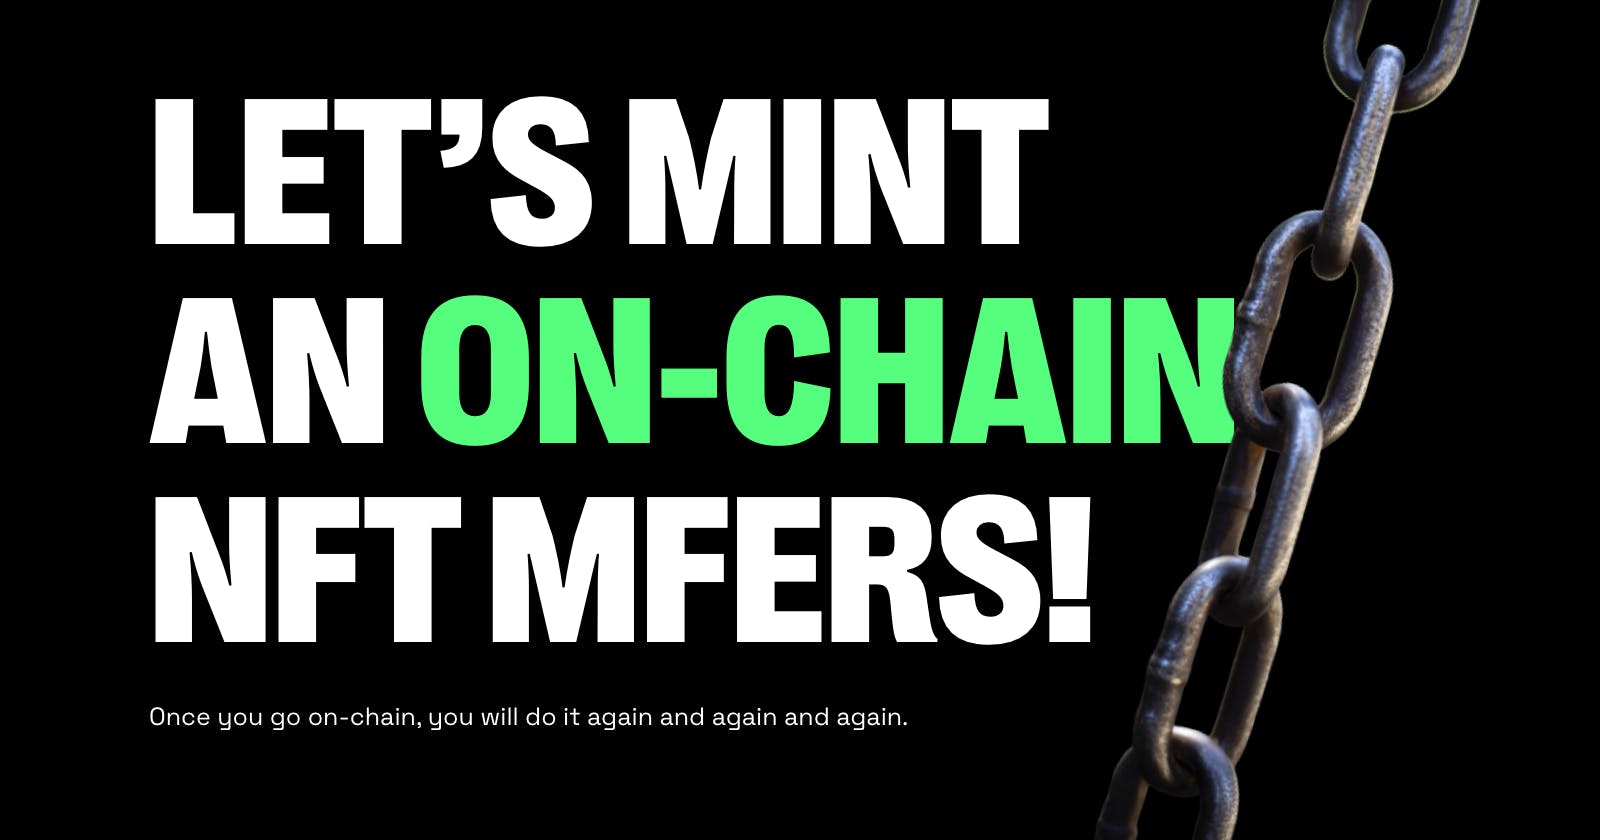 Let's mint an on-chain NFT mfers!